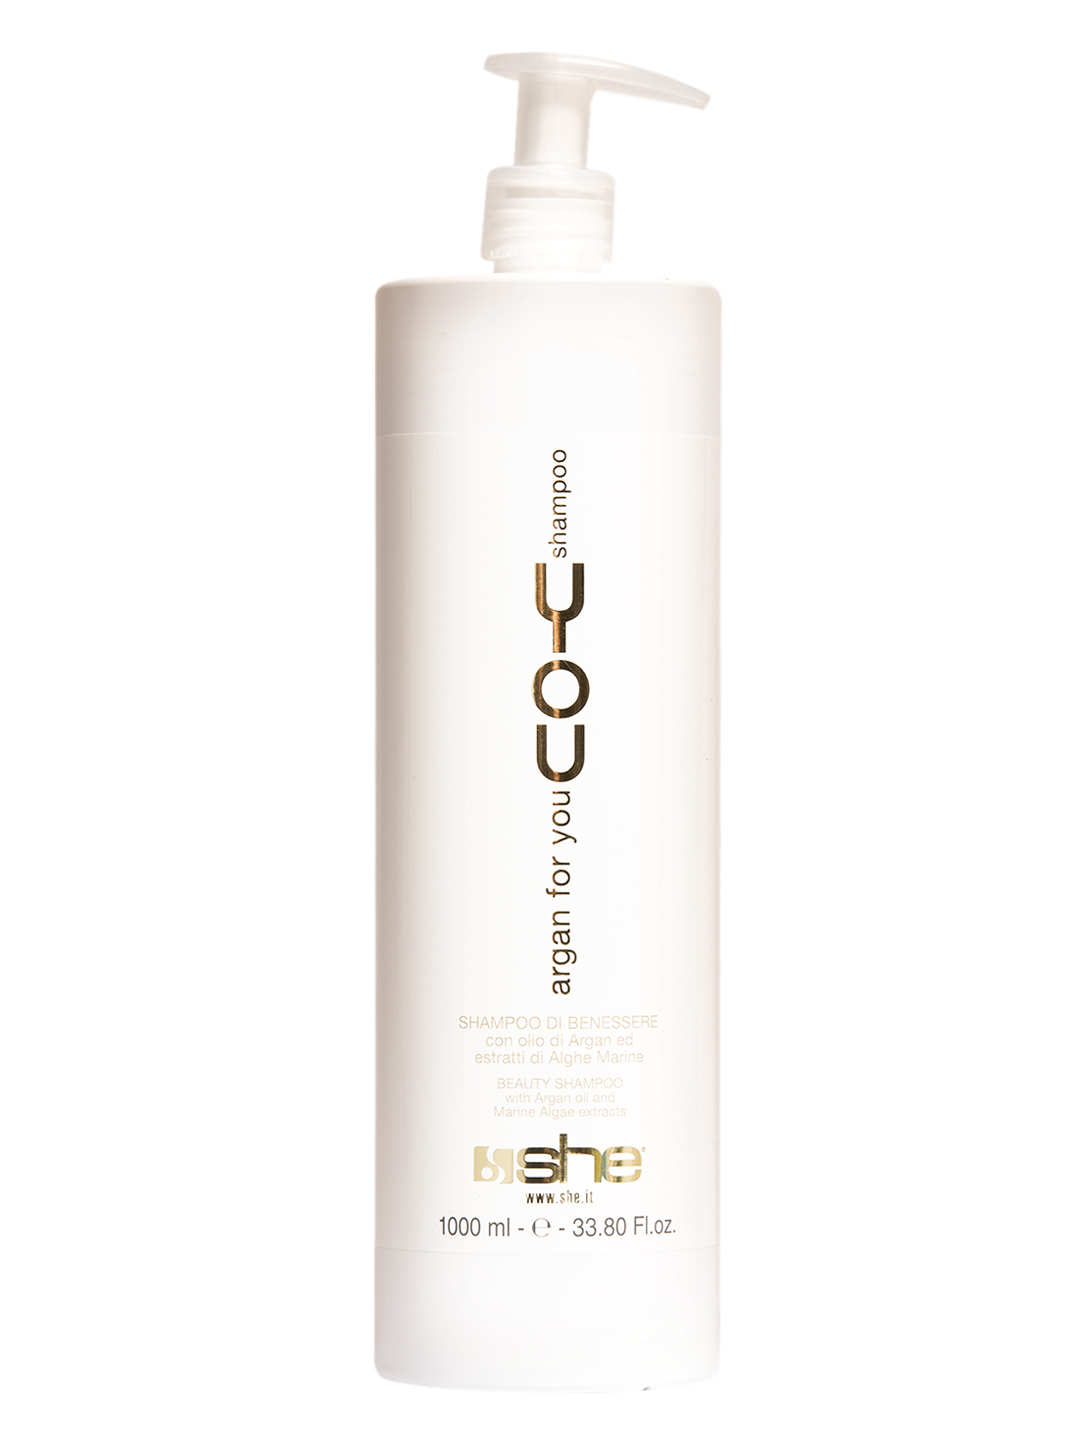 One 1000ML Argan For You Shampoo - wellness shampoo for all hair types with argan oil and seaweed extracts. Gently cleanses, nourishes and strengths the hair, while protecting it against free radicals and aging leaving the hair silky, shiny and healthy.  